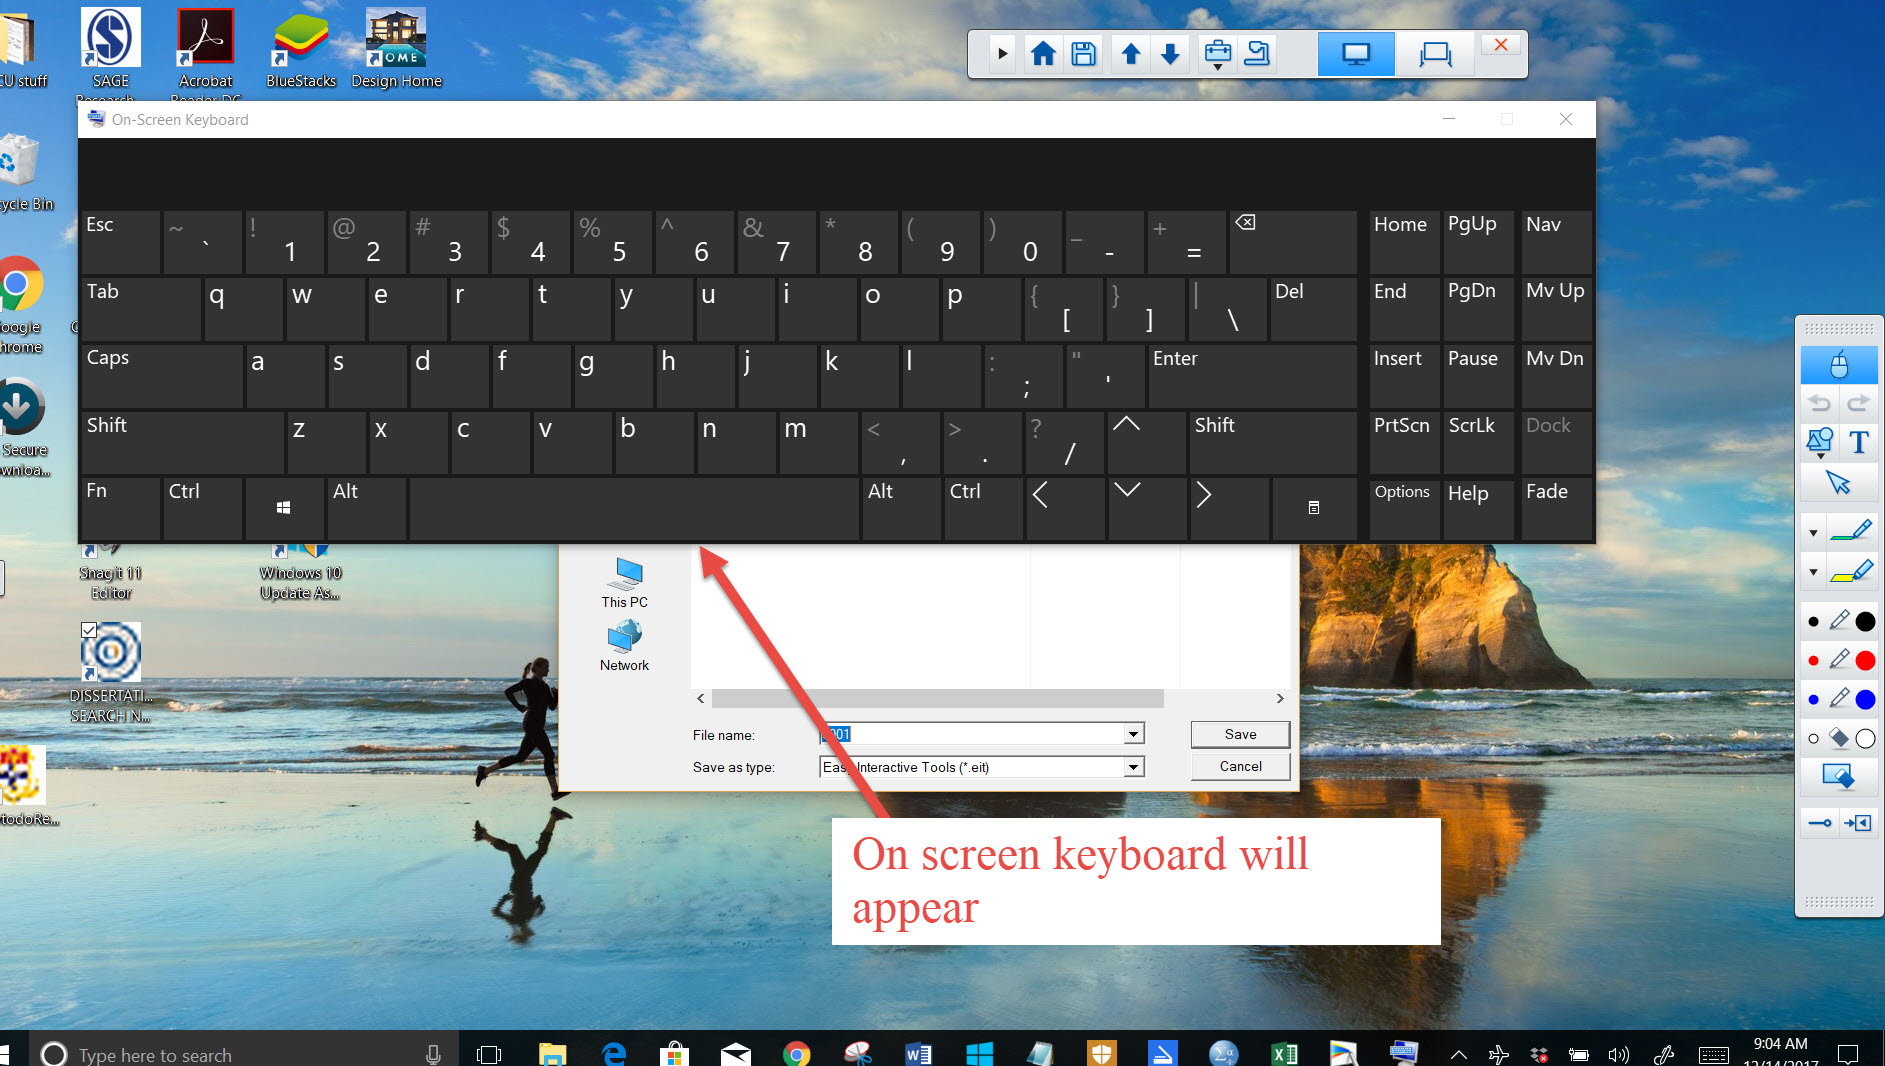 Select or create folder to save You can use the on creen keyboard to enter file name